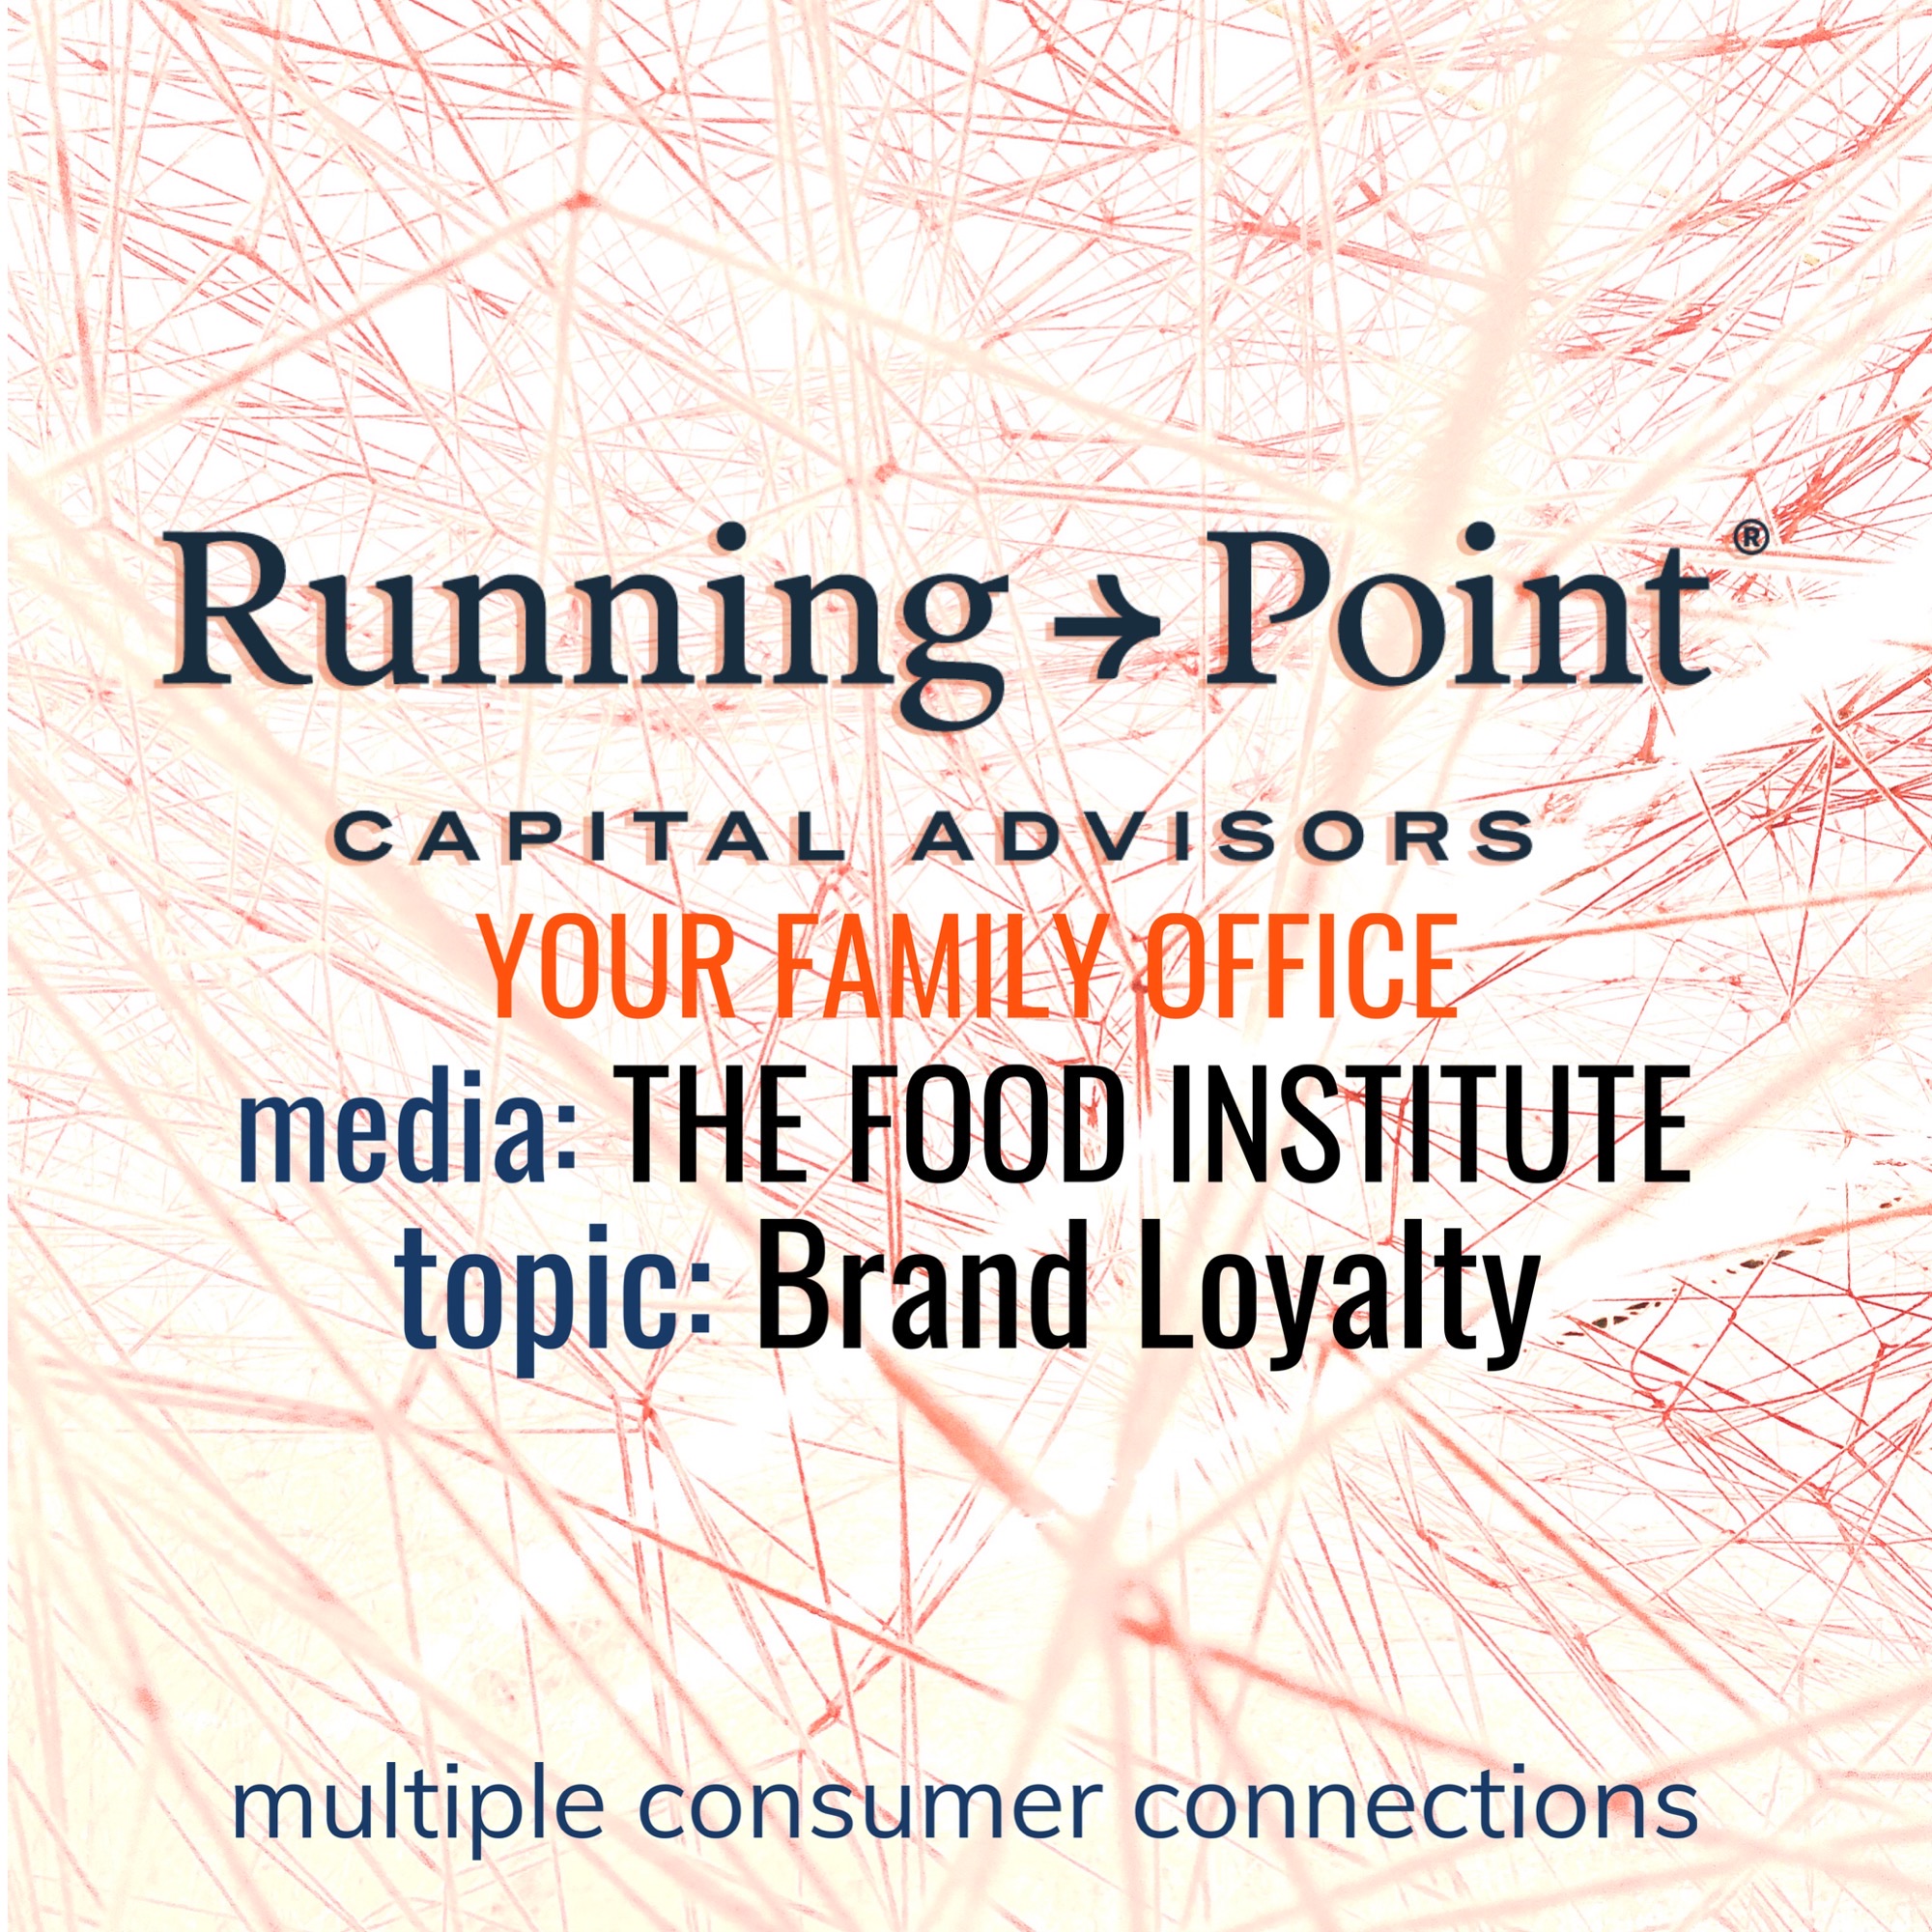 The Food Institute: Brand Loyalty